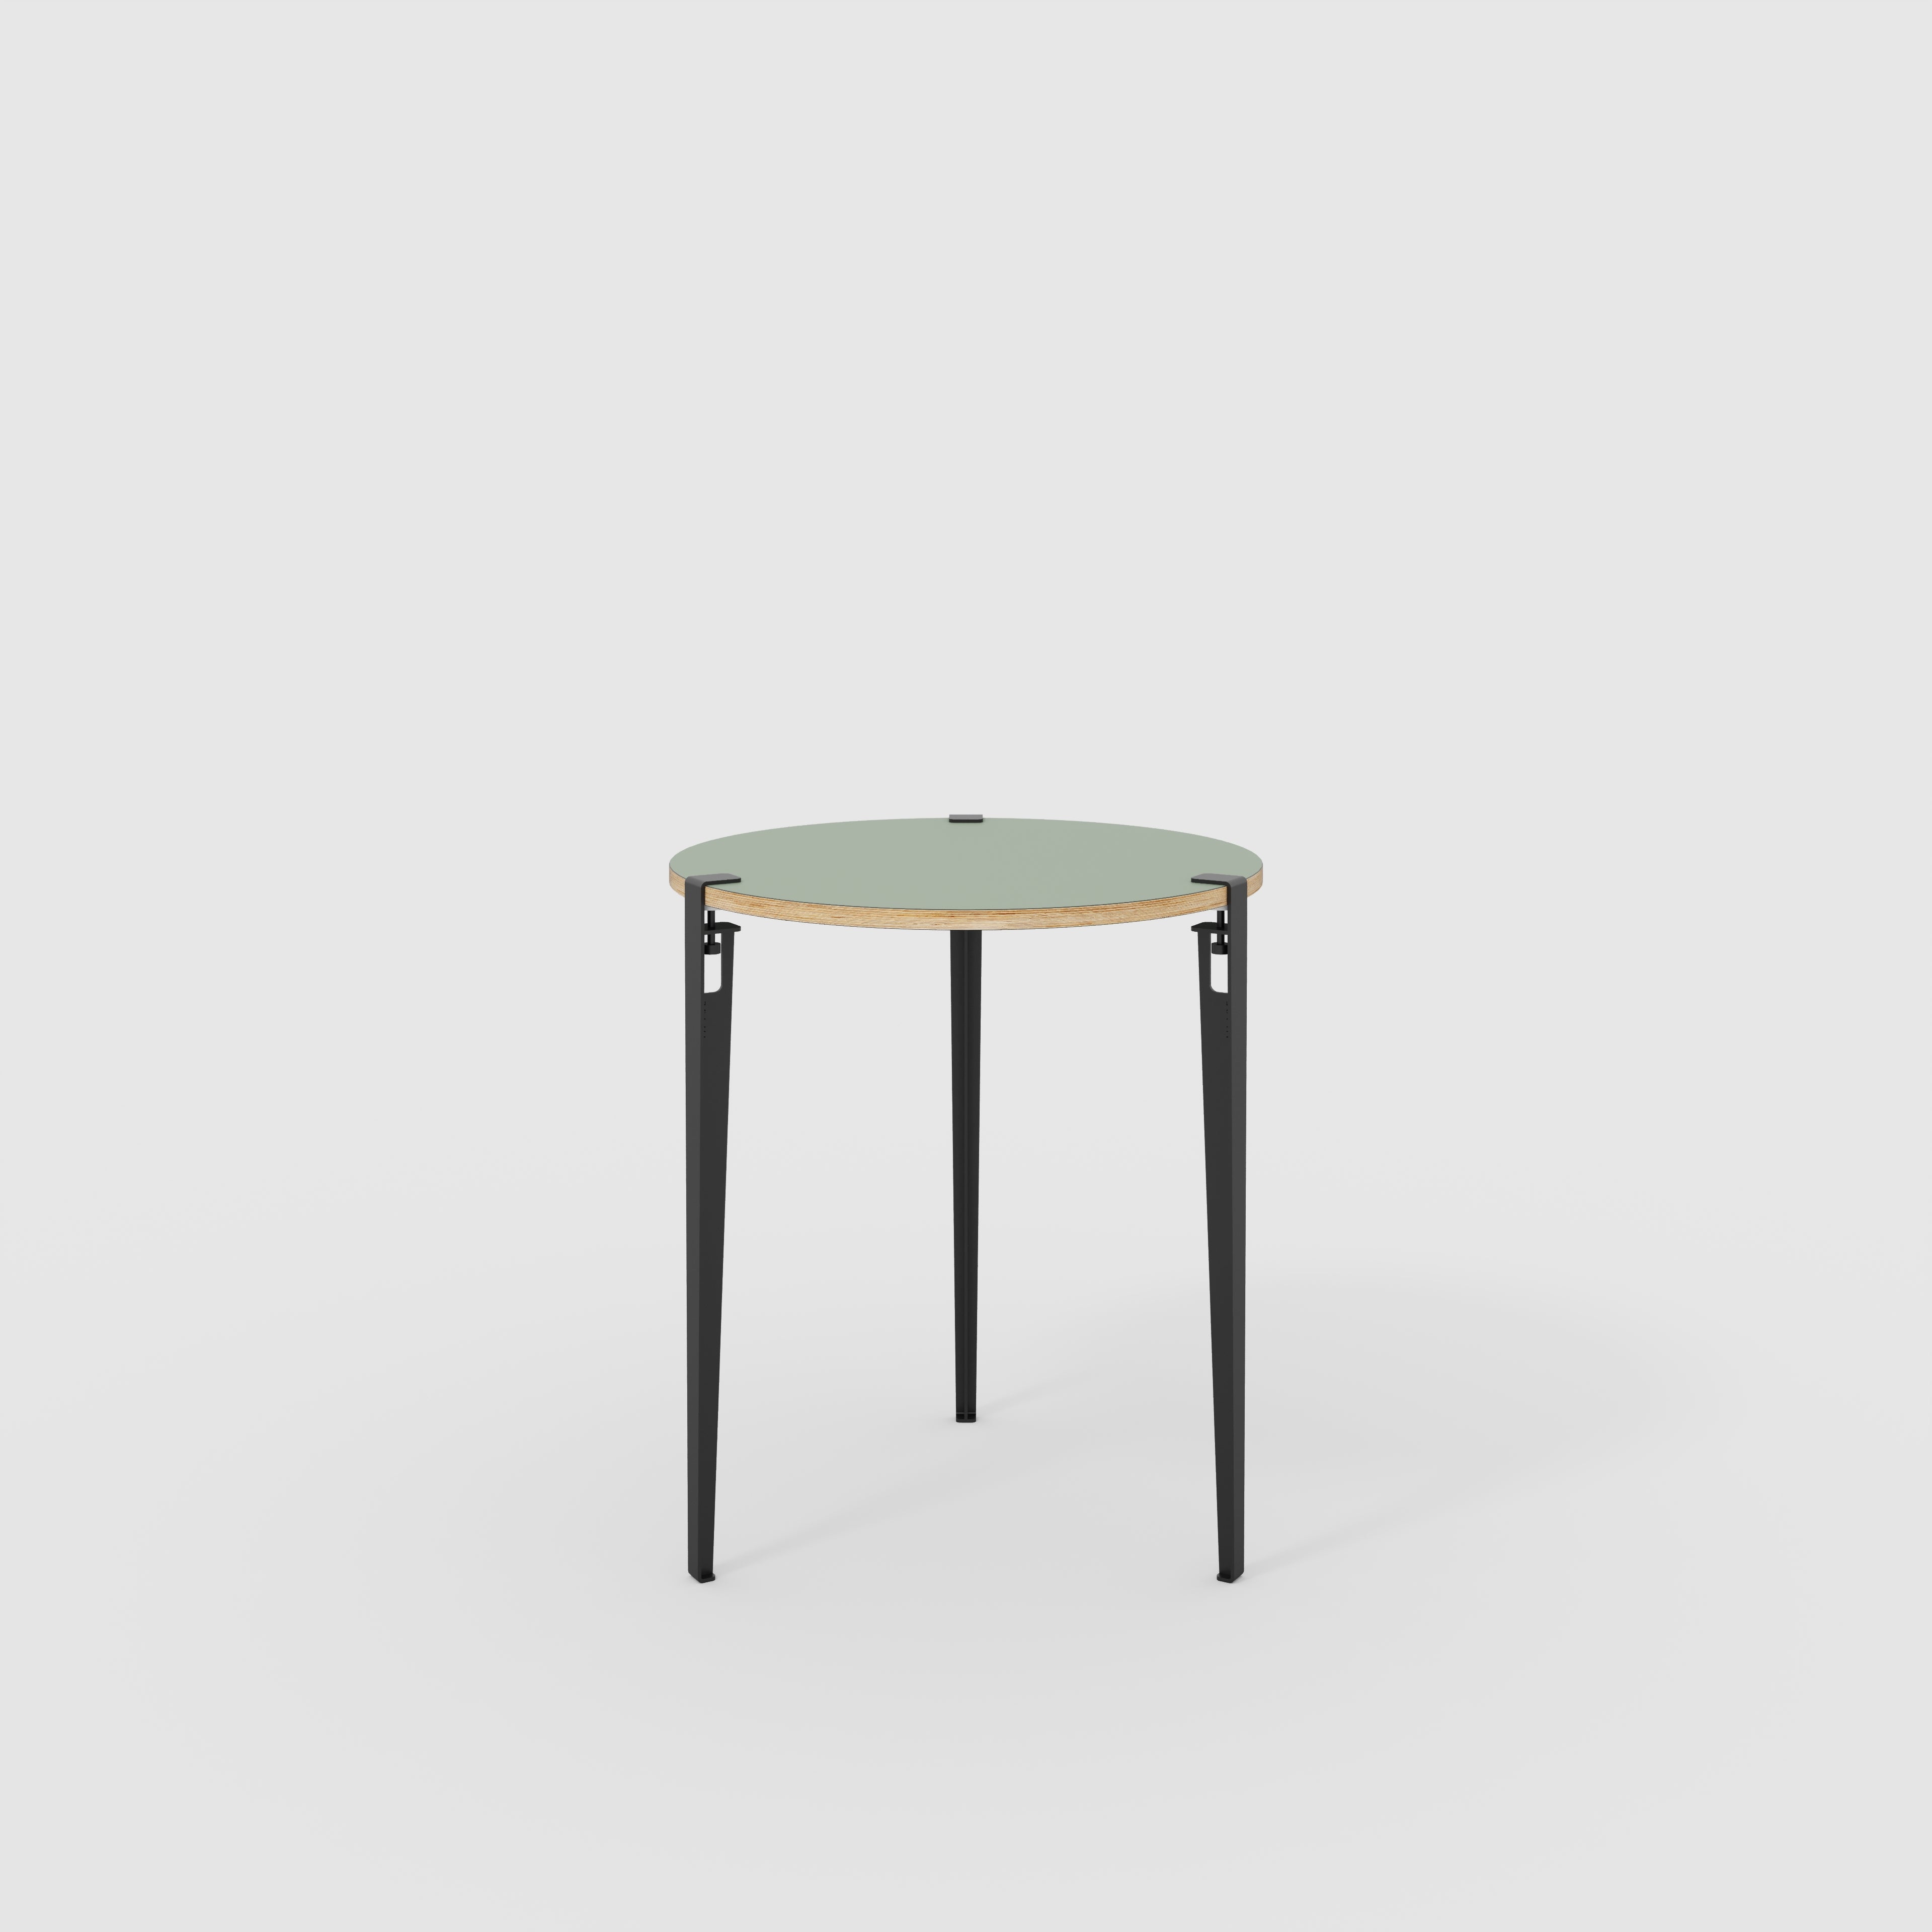 Round Table with Black Tiptoe Legs - Formica Green Slate - 800(dia) x 900(h)